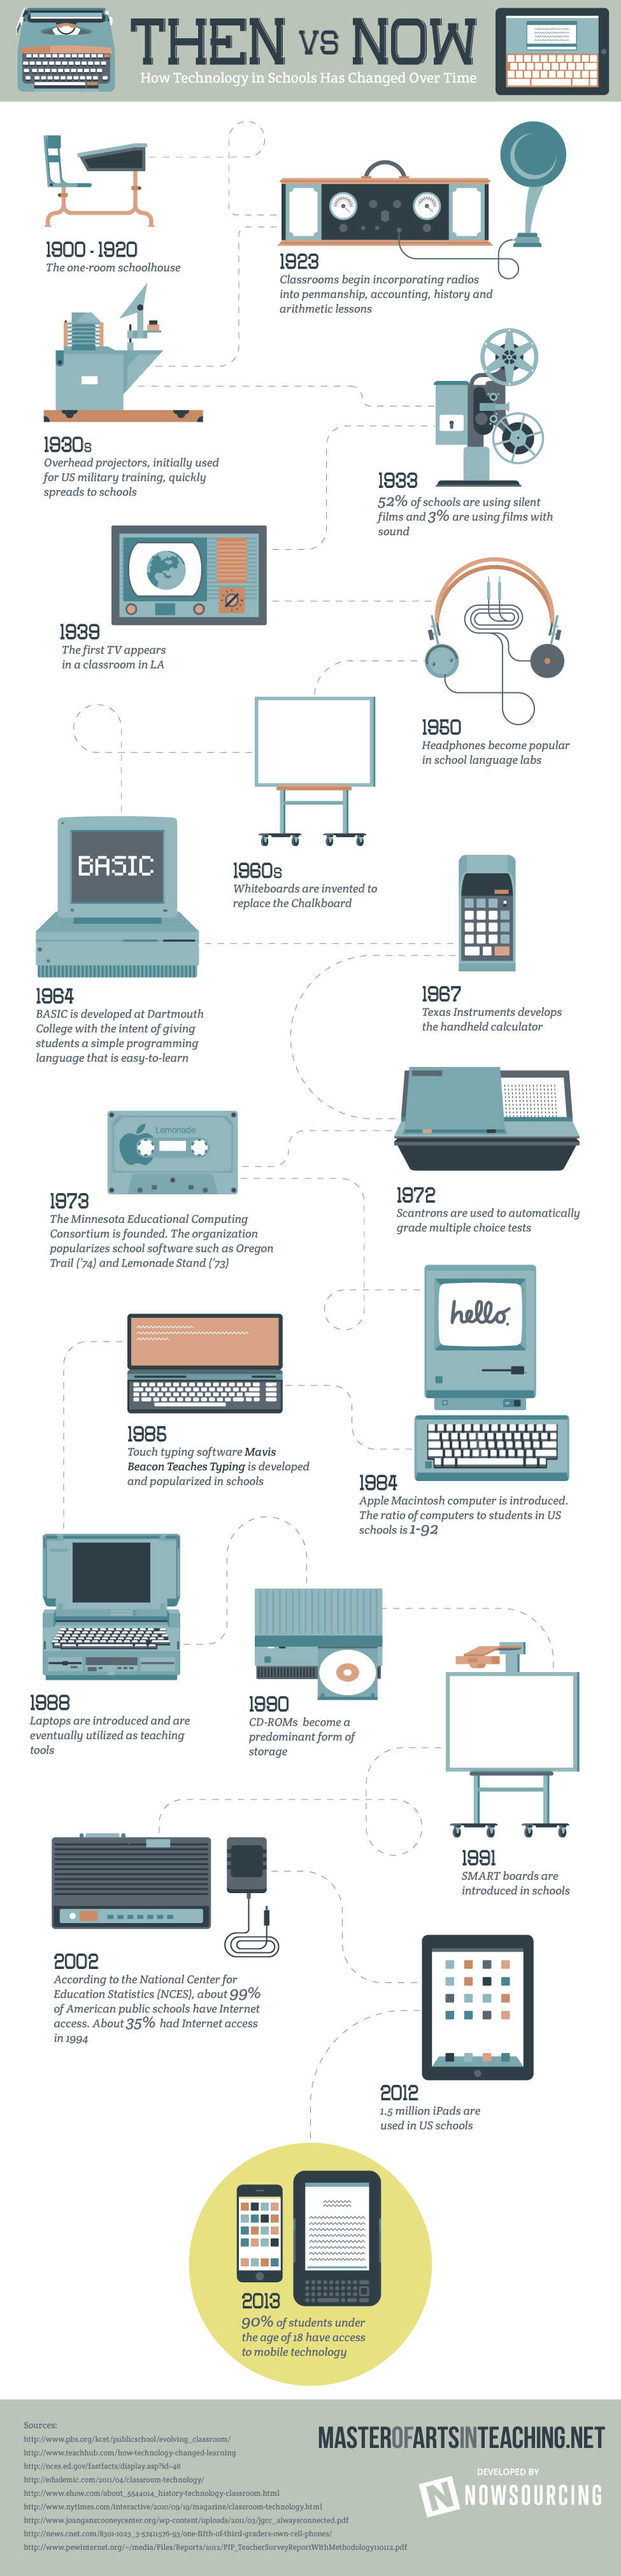 Then vs Now: Technology in Schools